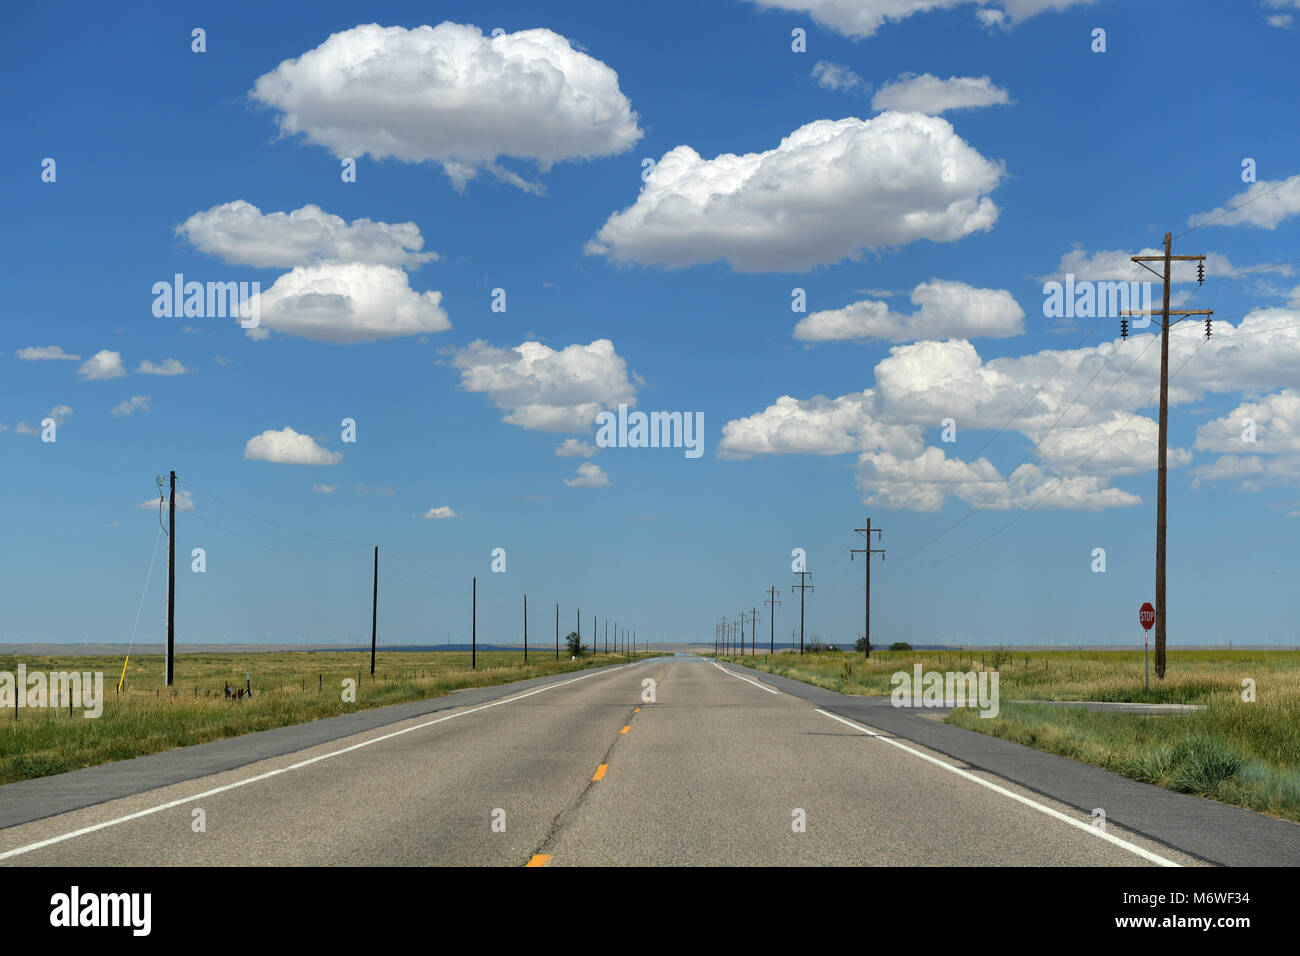 Paved road with posts on sides during bright day Stock Photo